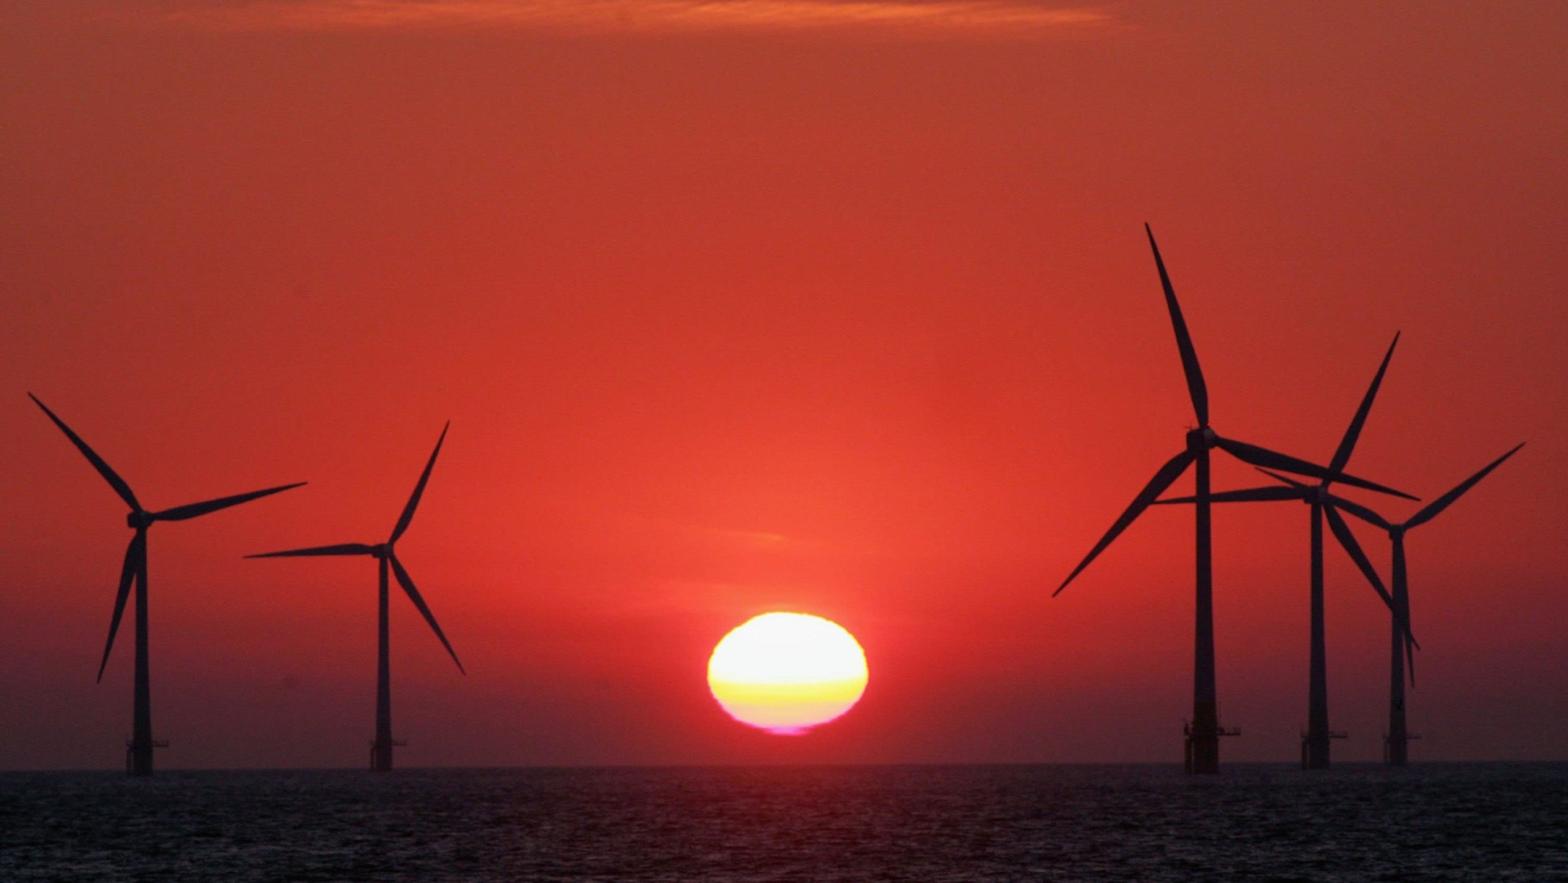 The sun starts to rise behind an offshore wind farm off the Great Yarmouth coastline. (Photo: Matt Cardy, Getty Images)